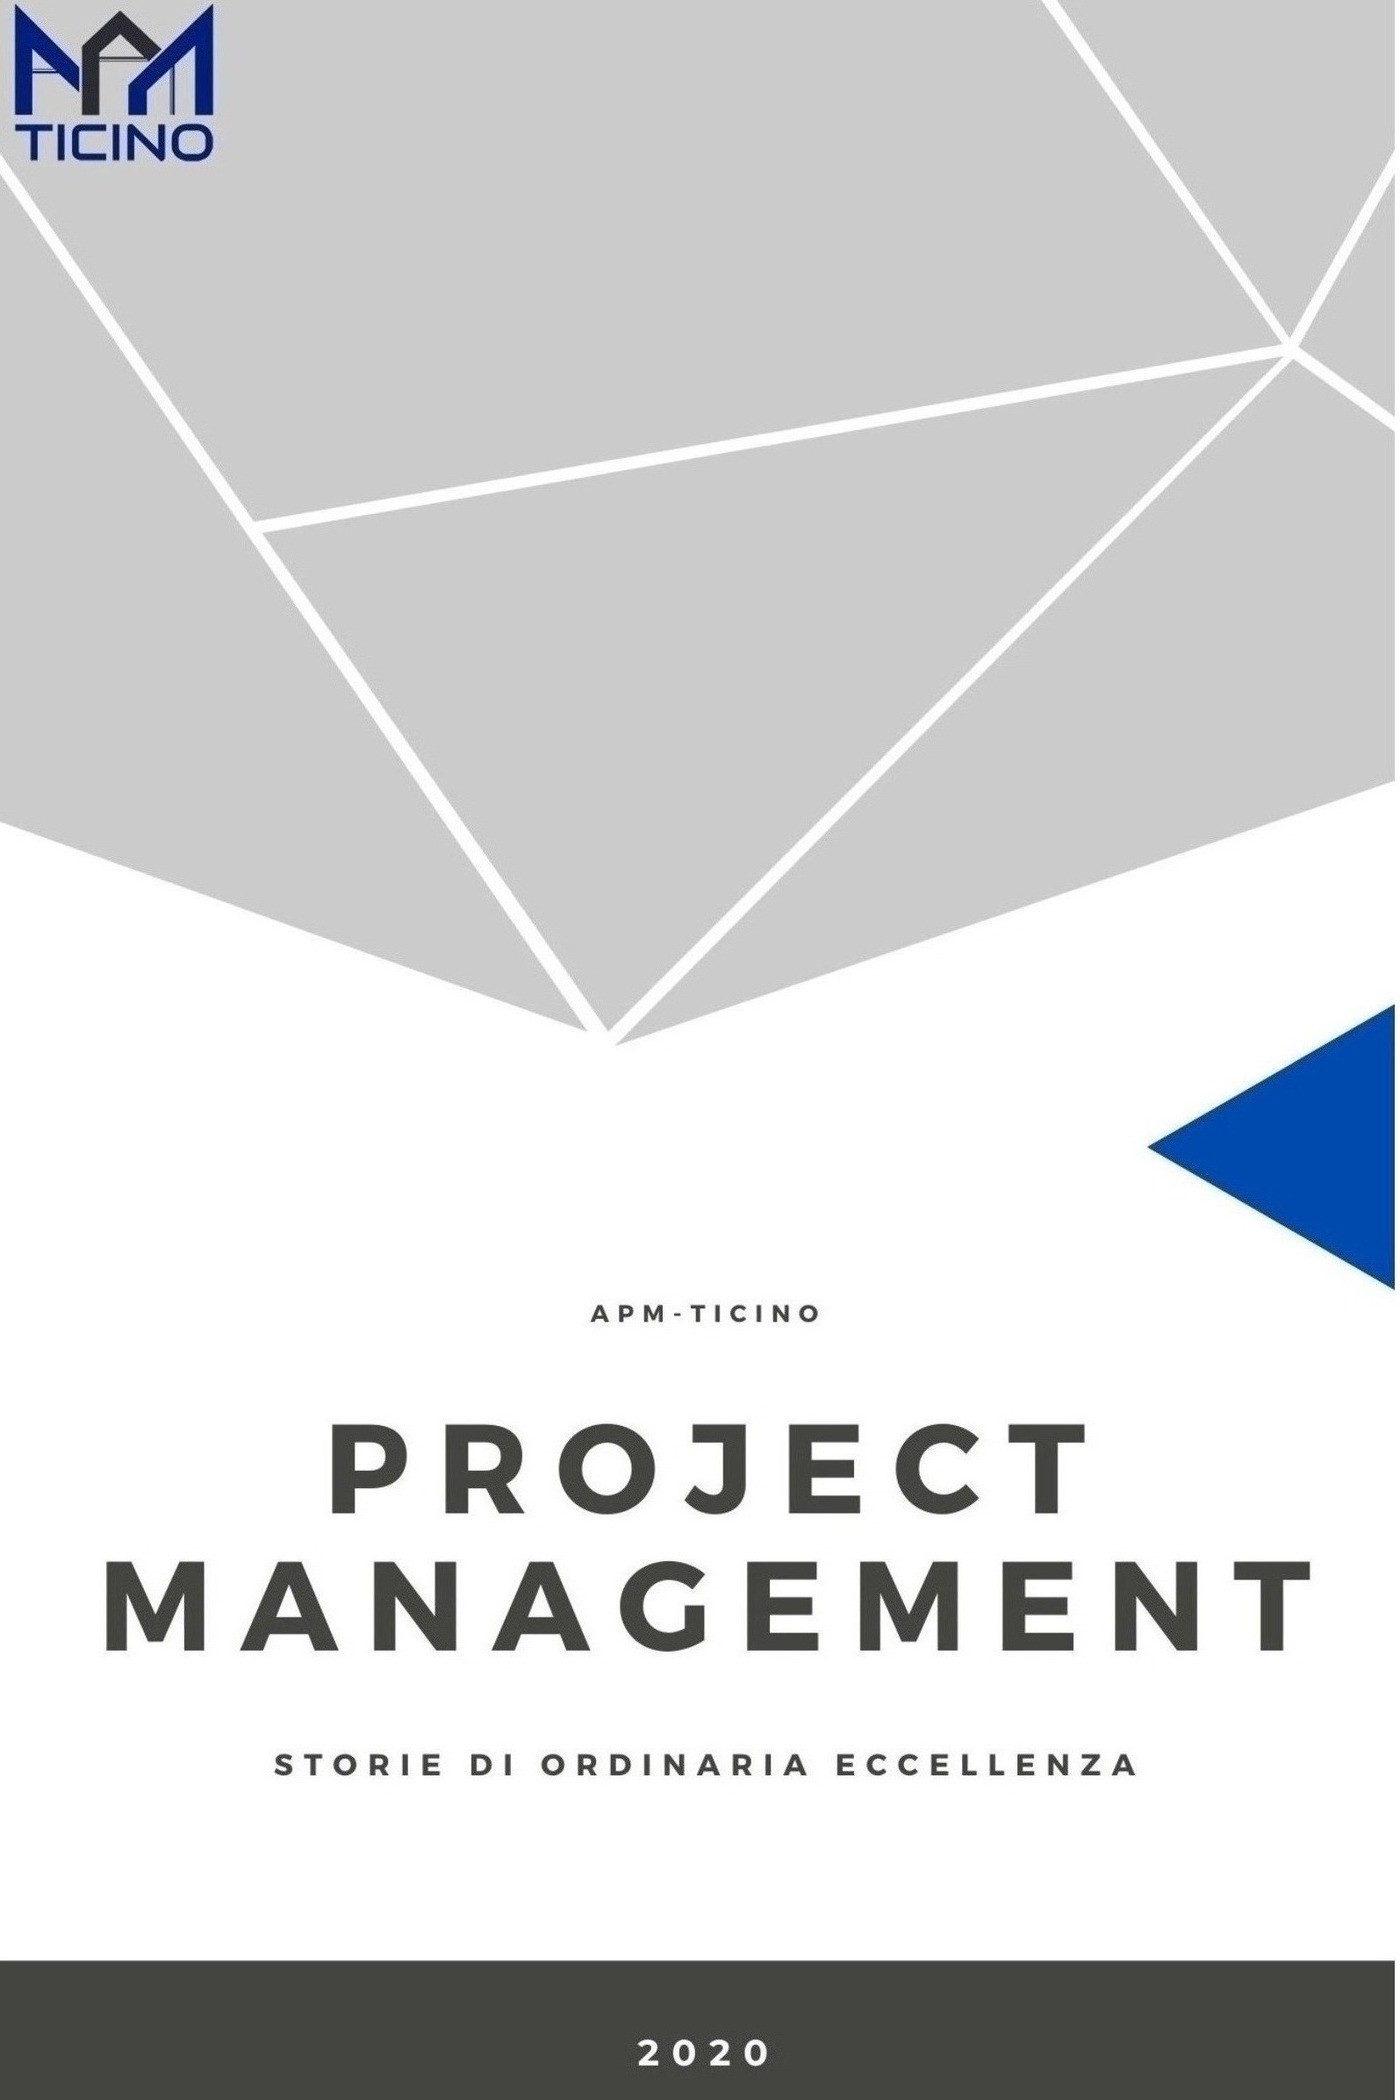 Associazione Project Management – Ticino / Antologia 2020 - Librerie.coop